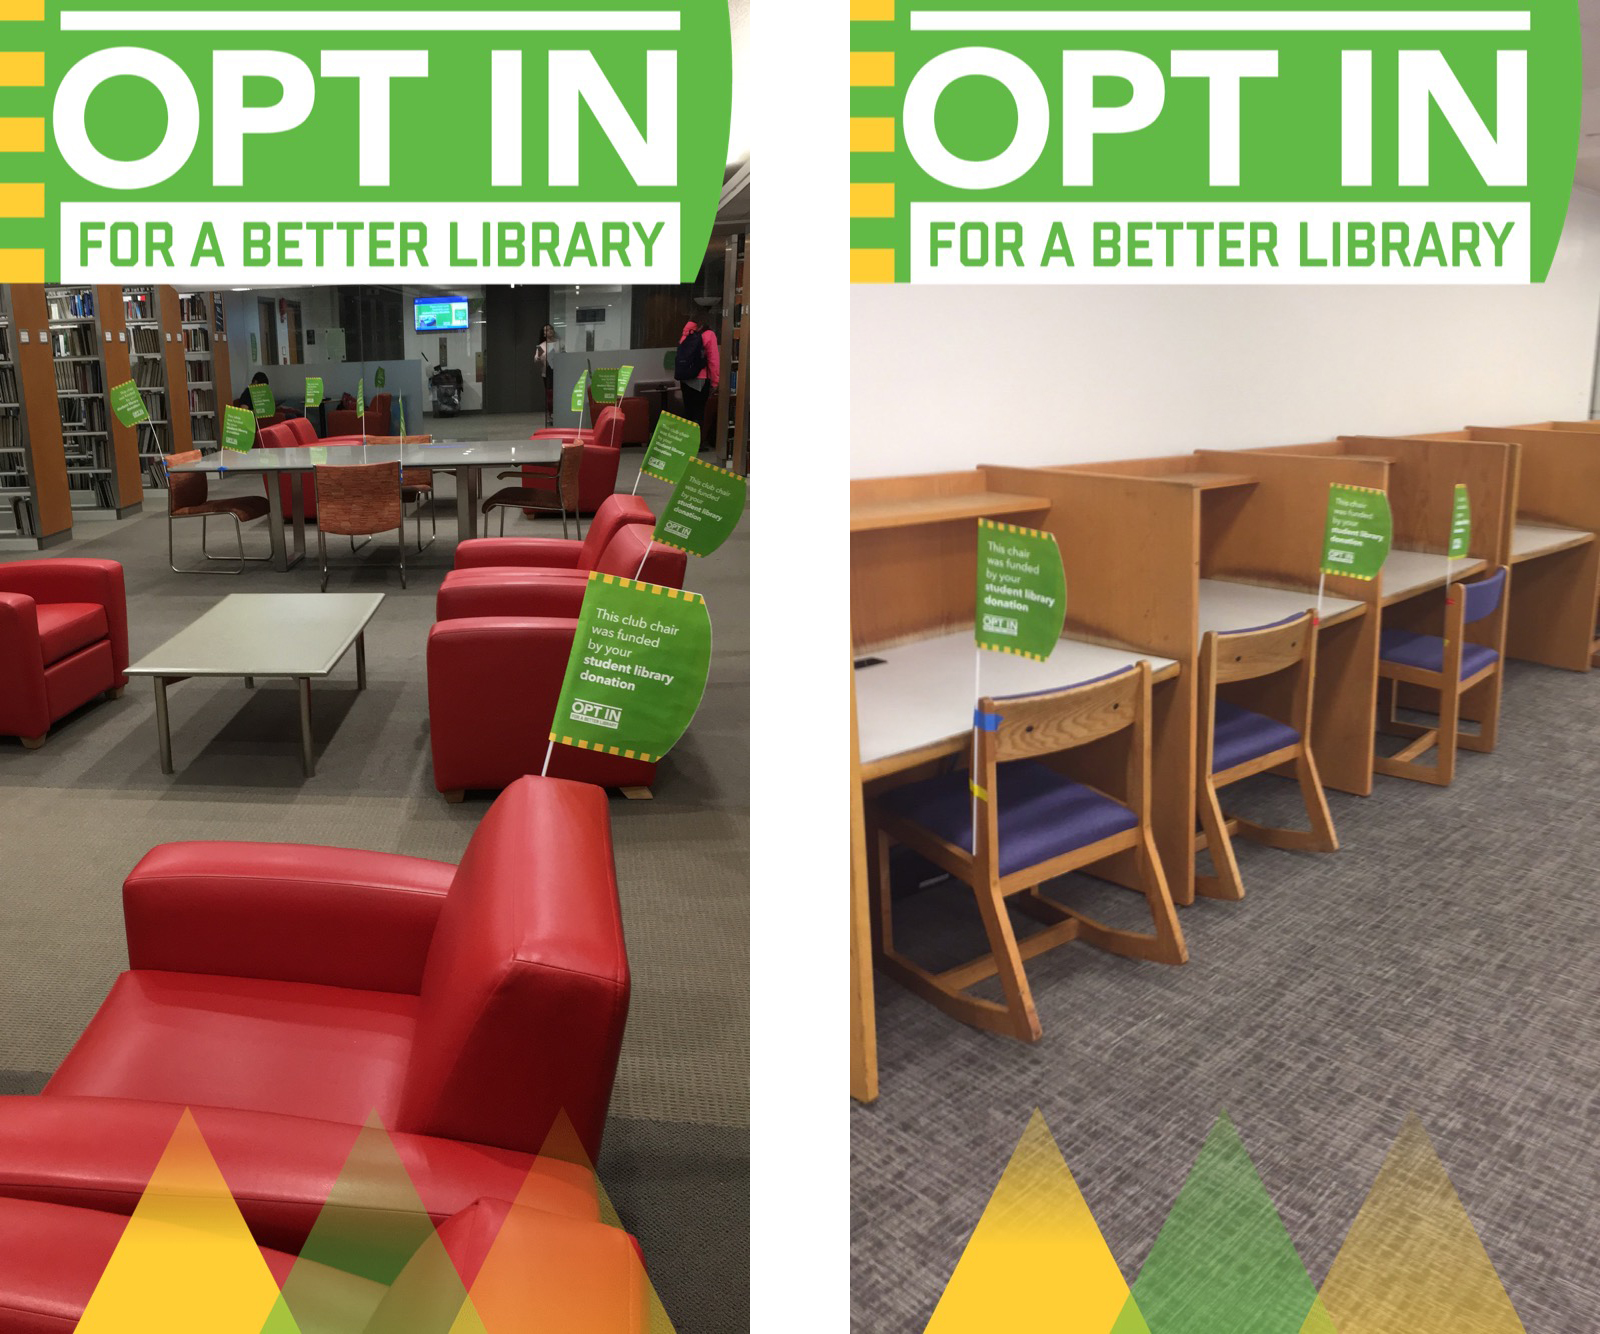 Opt in for a better library Snapchat filter